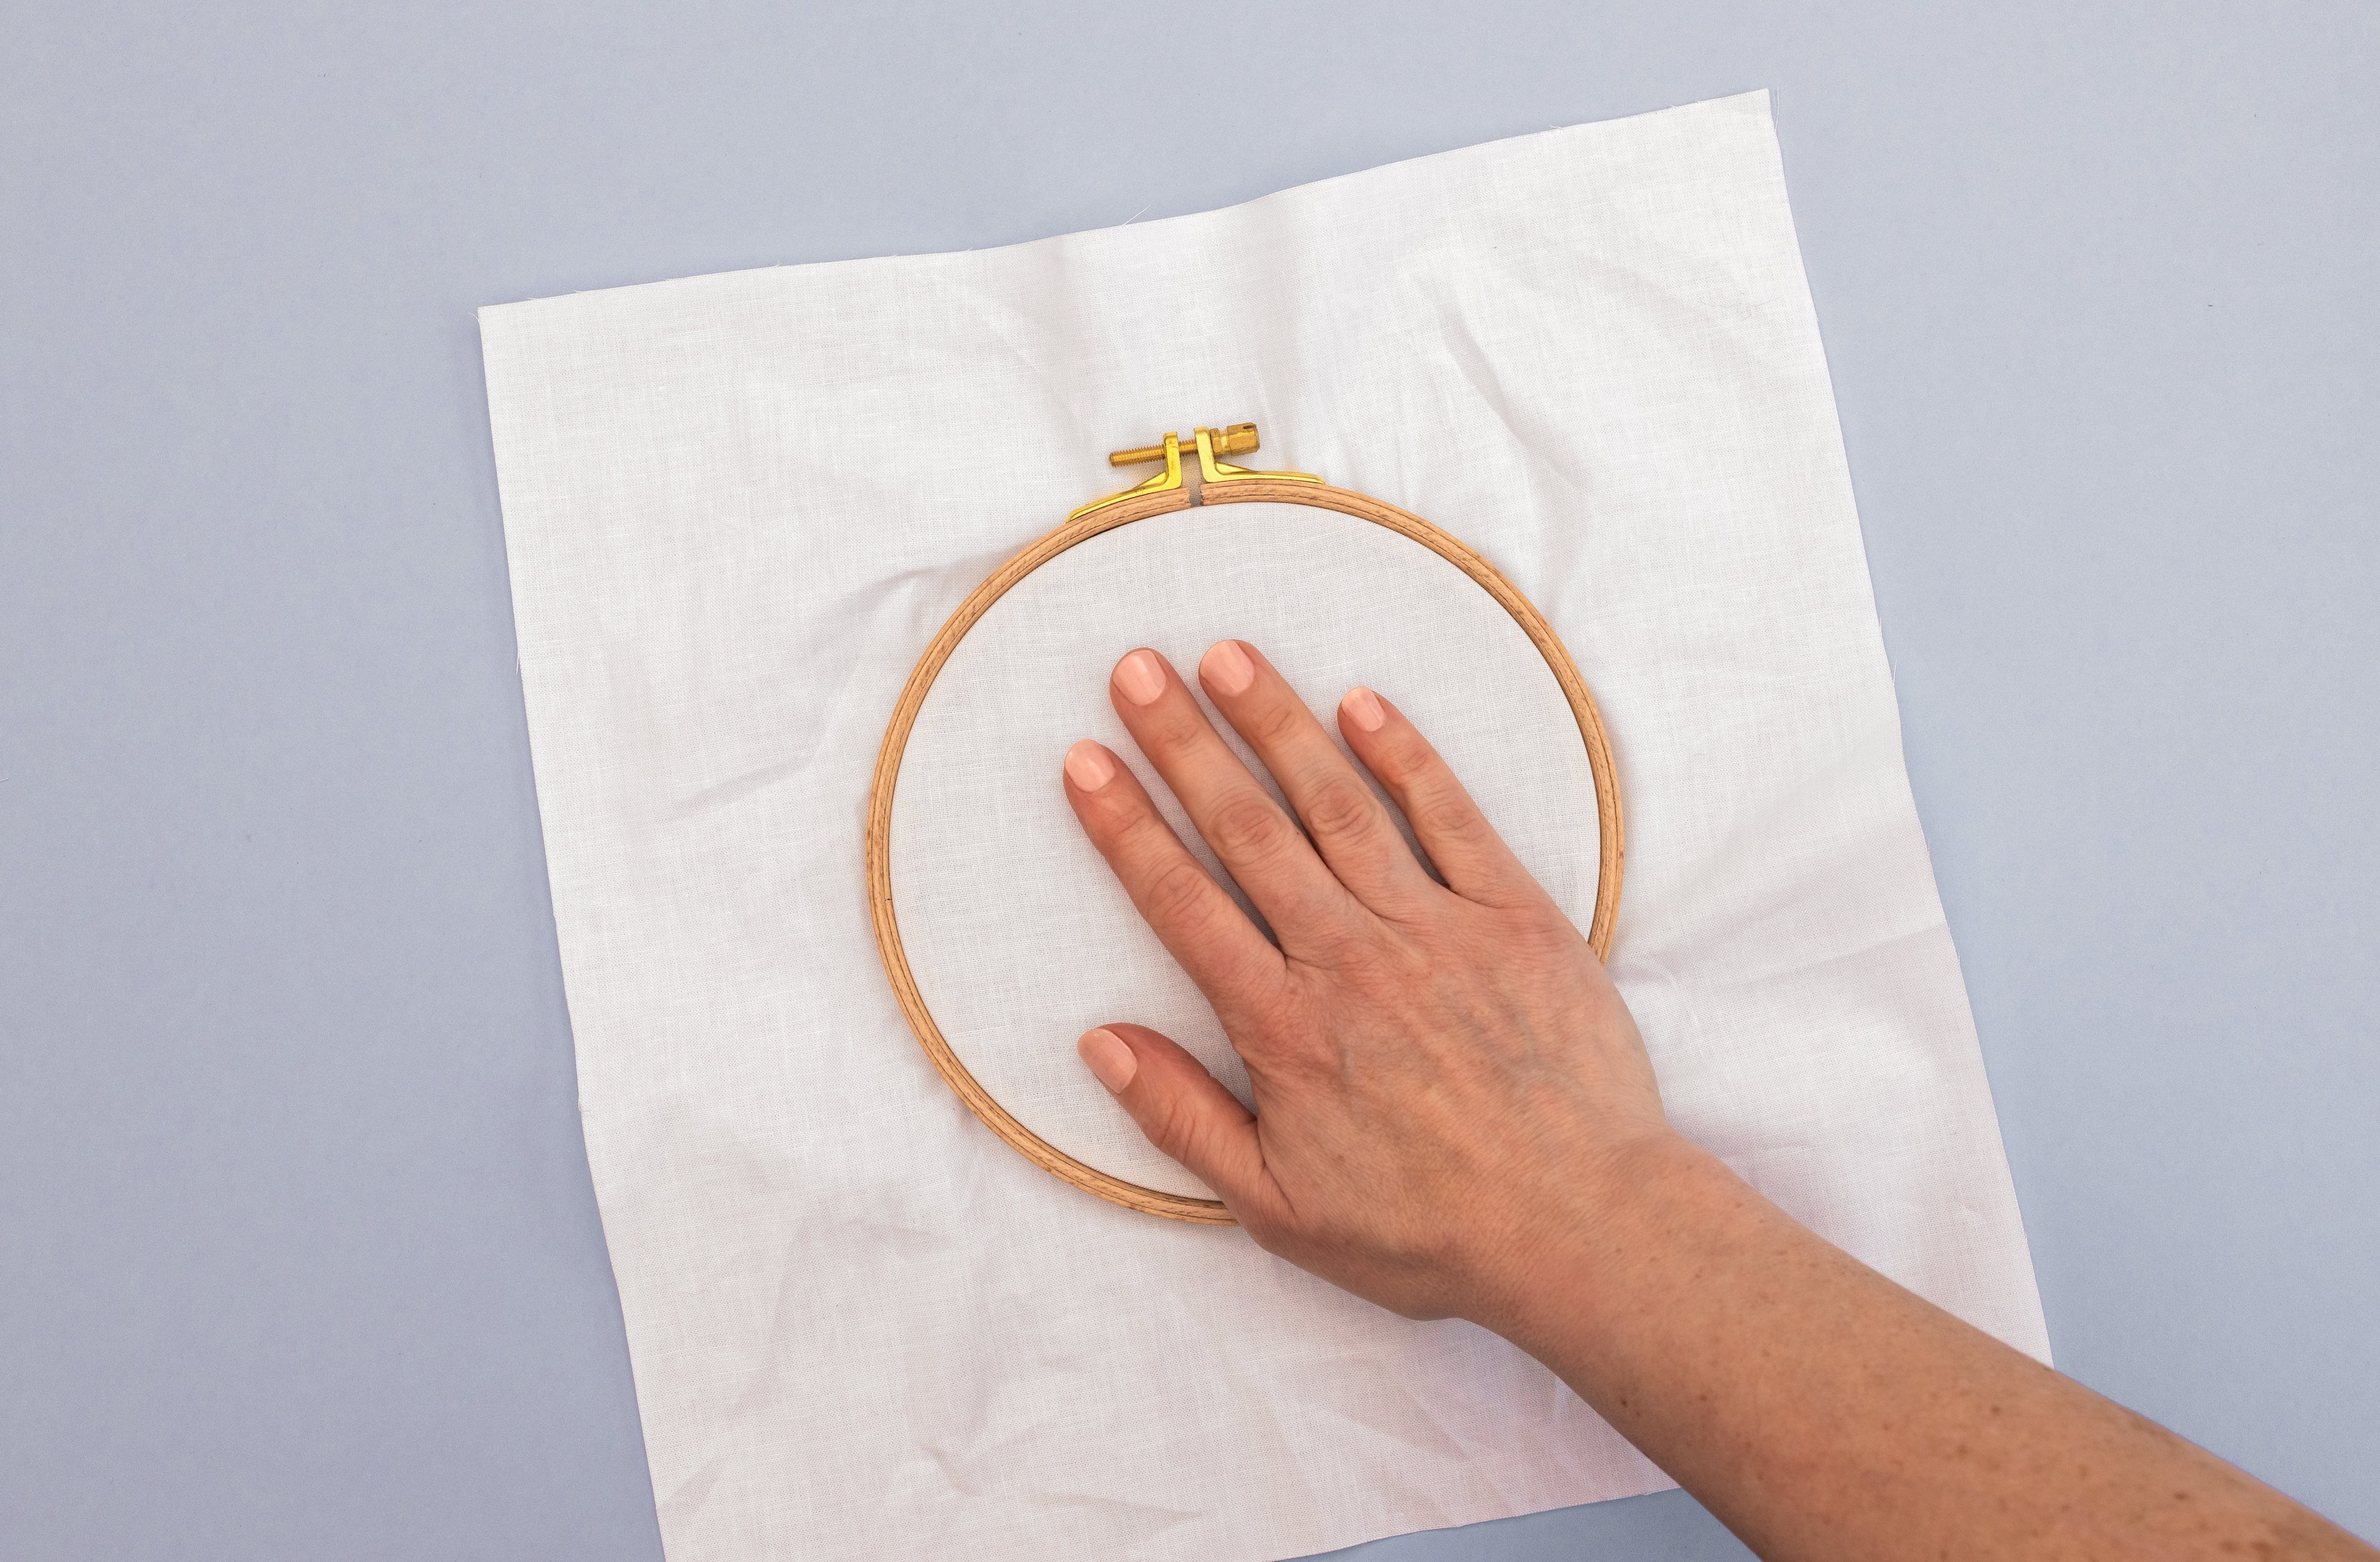 A hand presses down on the fabric in the hoop.